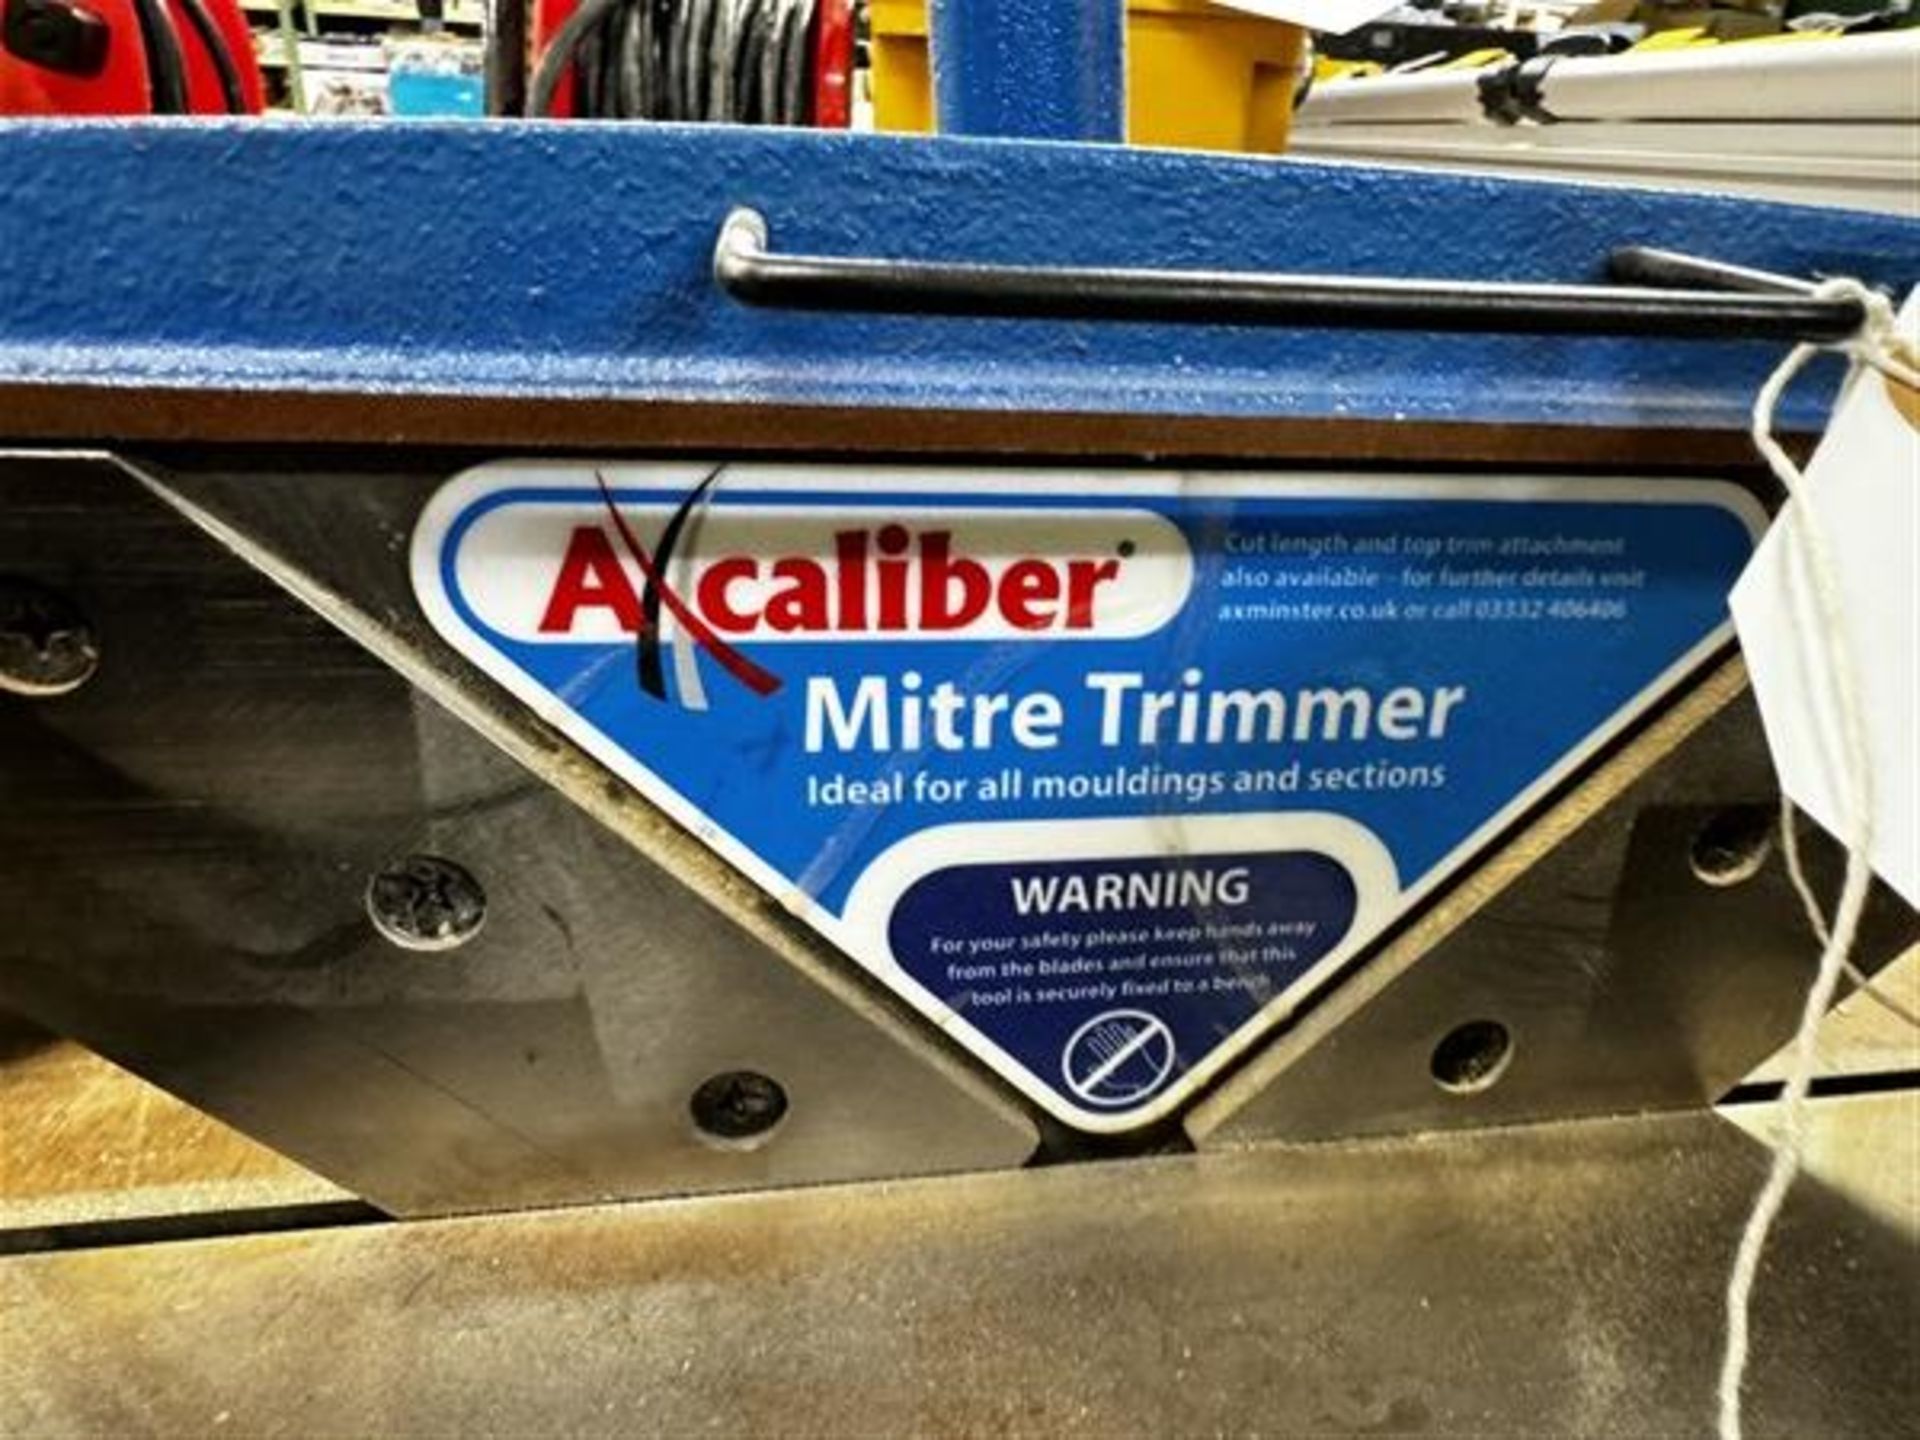 Axcaliber mitre trimmer - Image 2 of 3